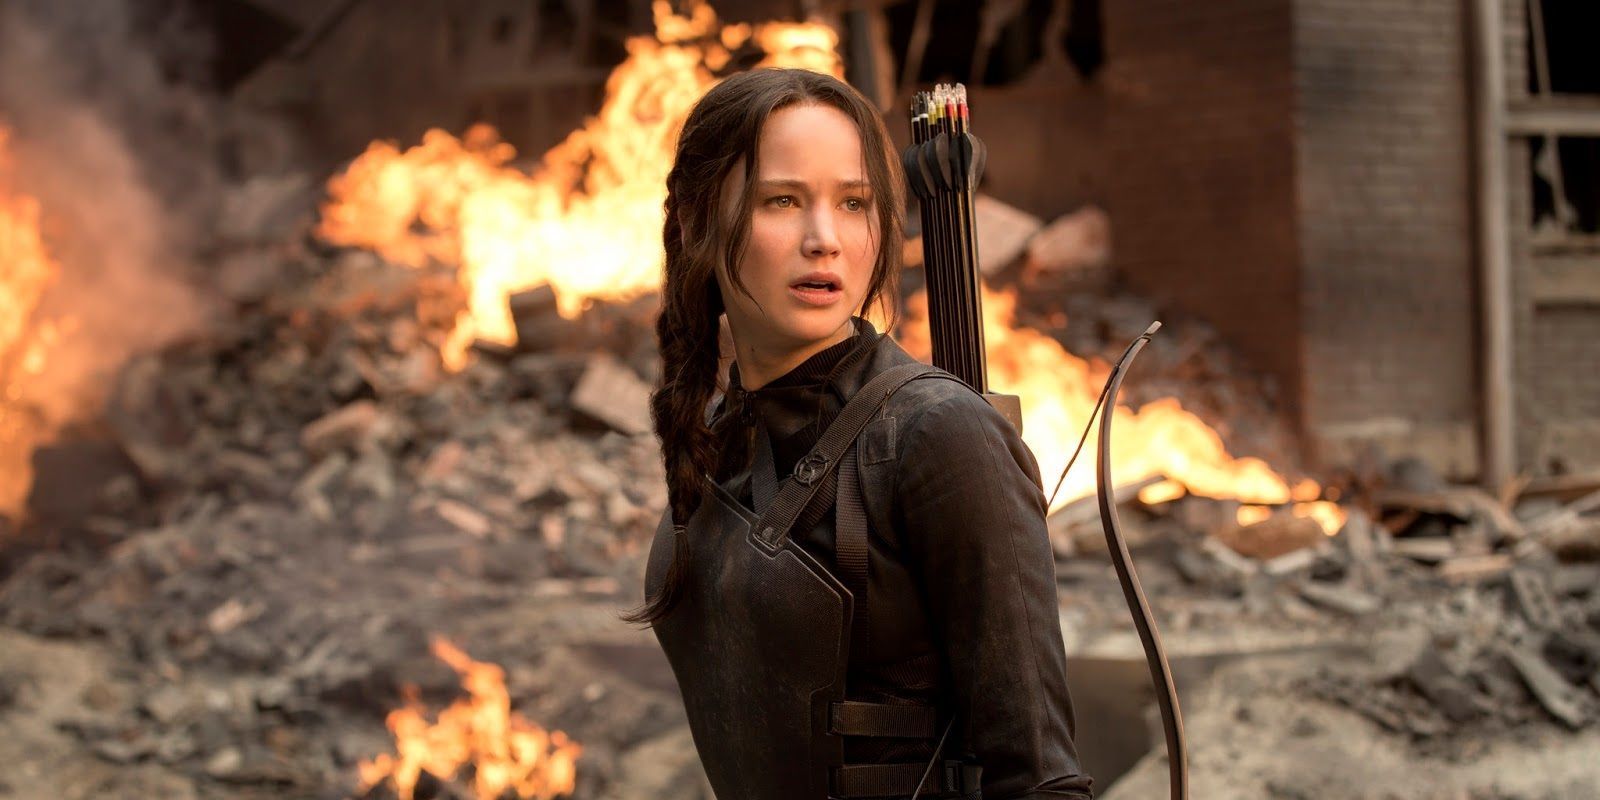 Katniss in front of a flaming background in The Hunger Games.